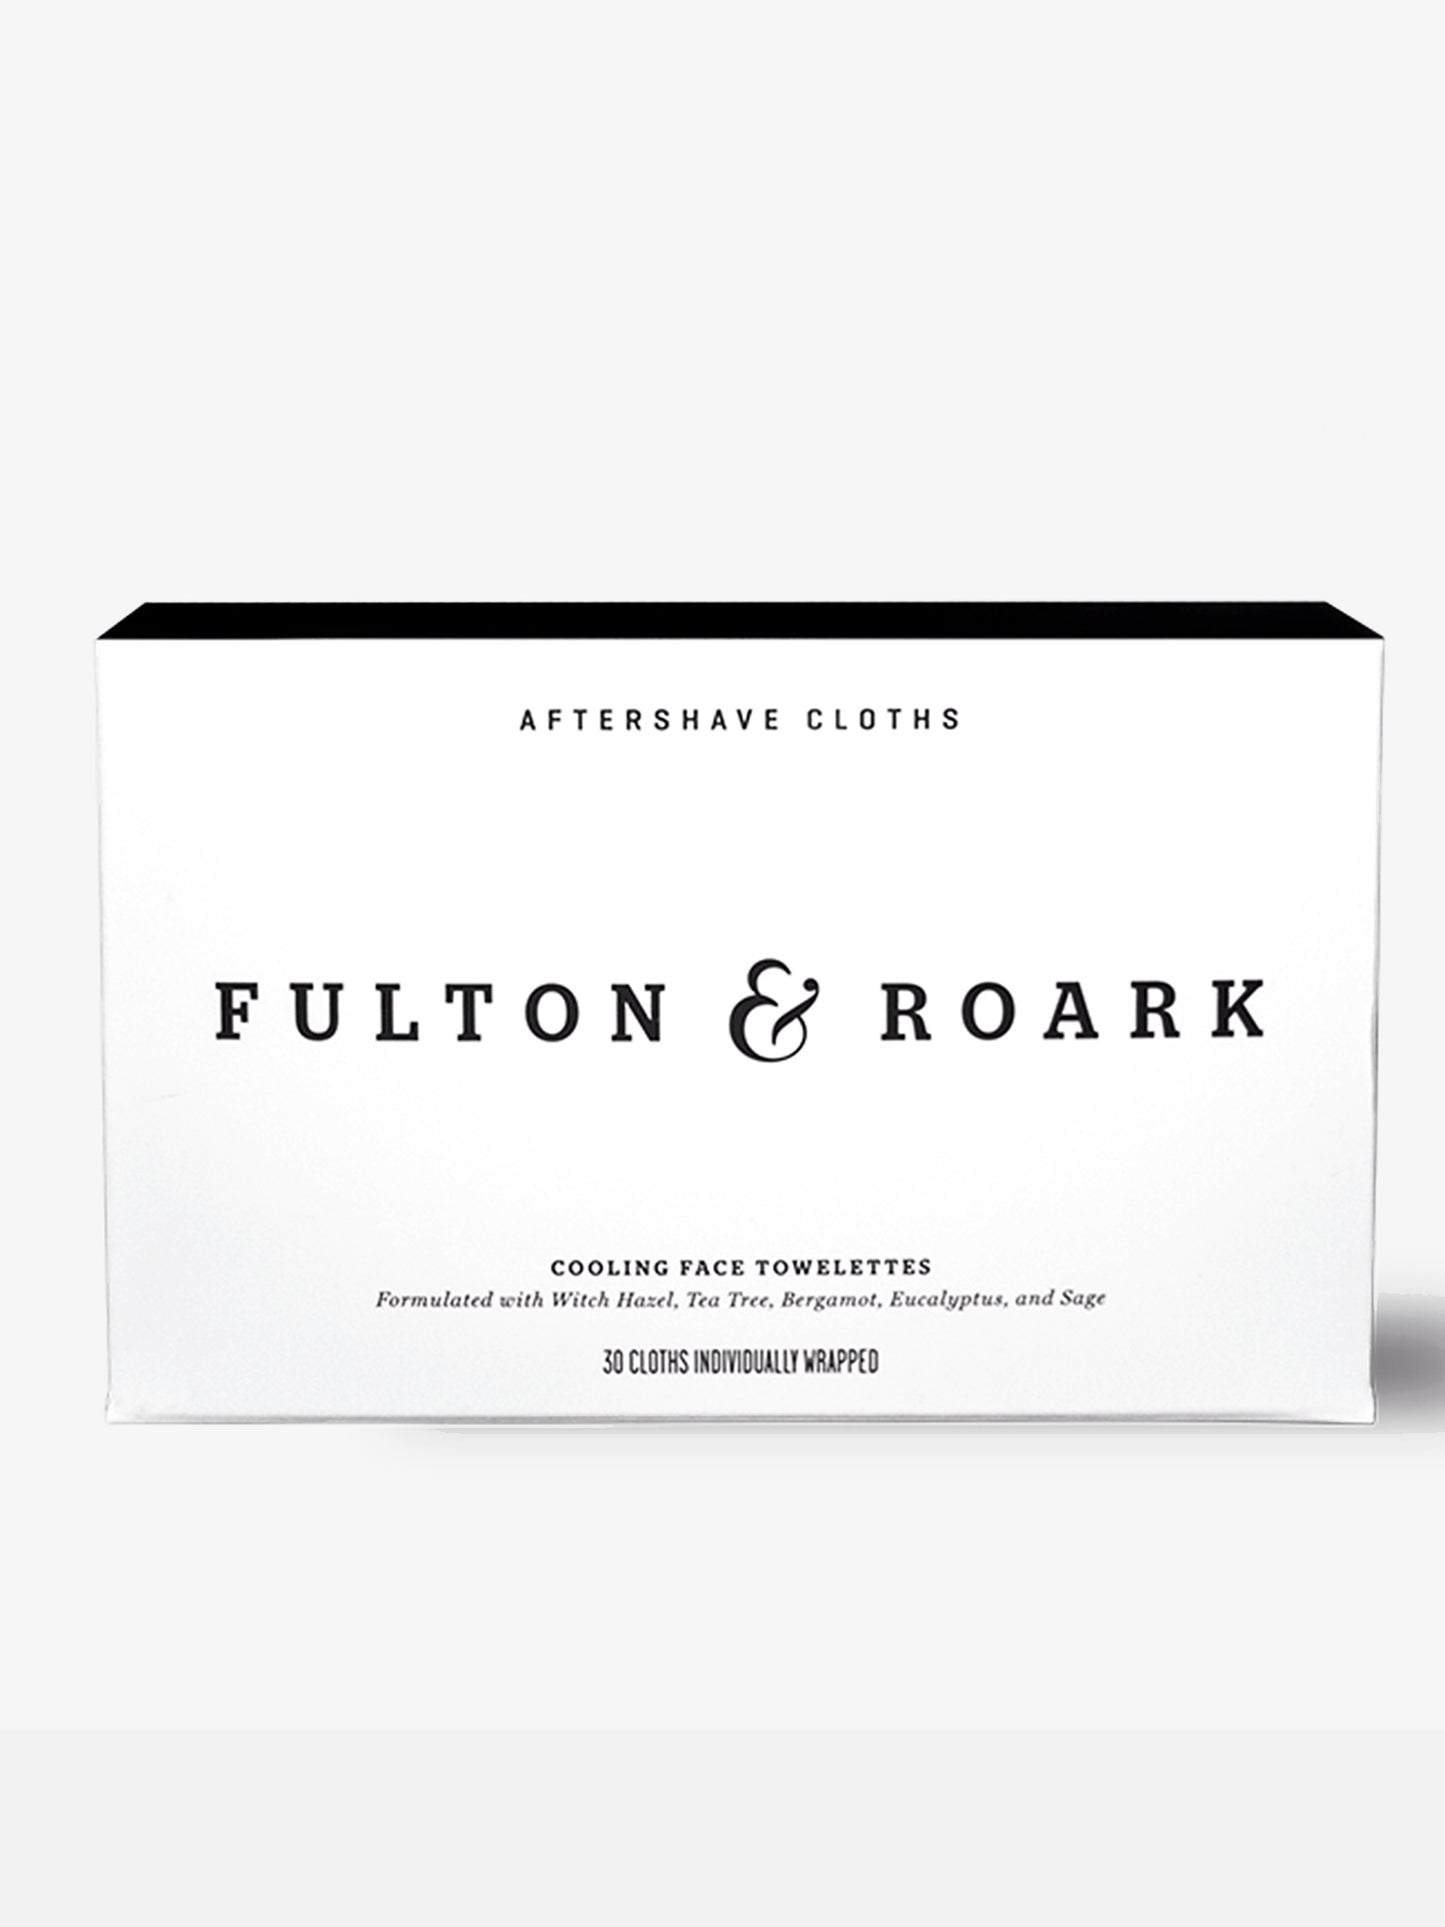 Fulton and Roark Aftershave Cloths 30 Pack